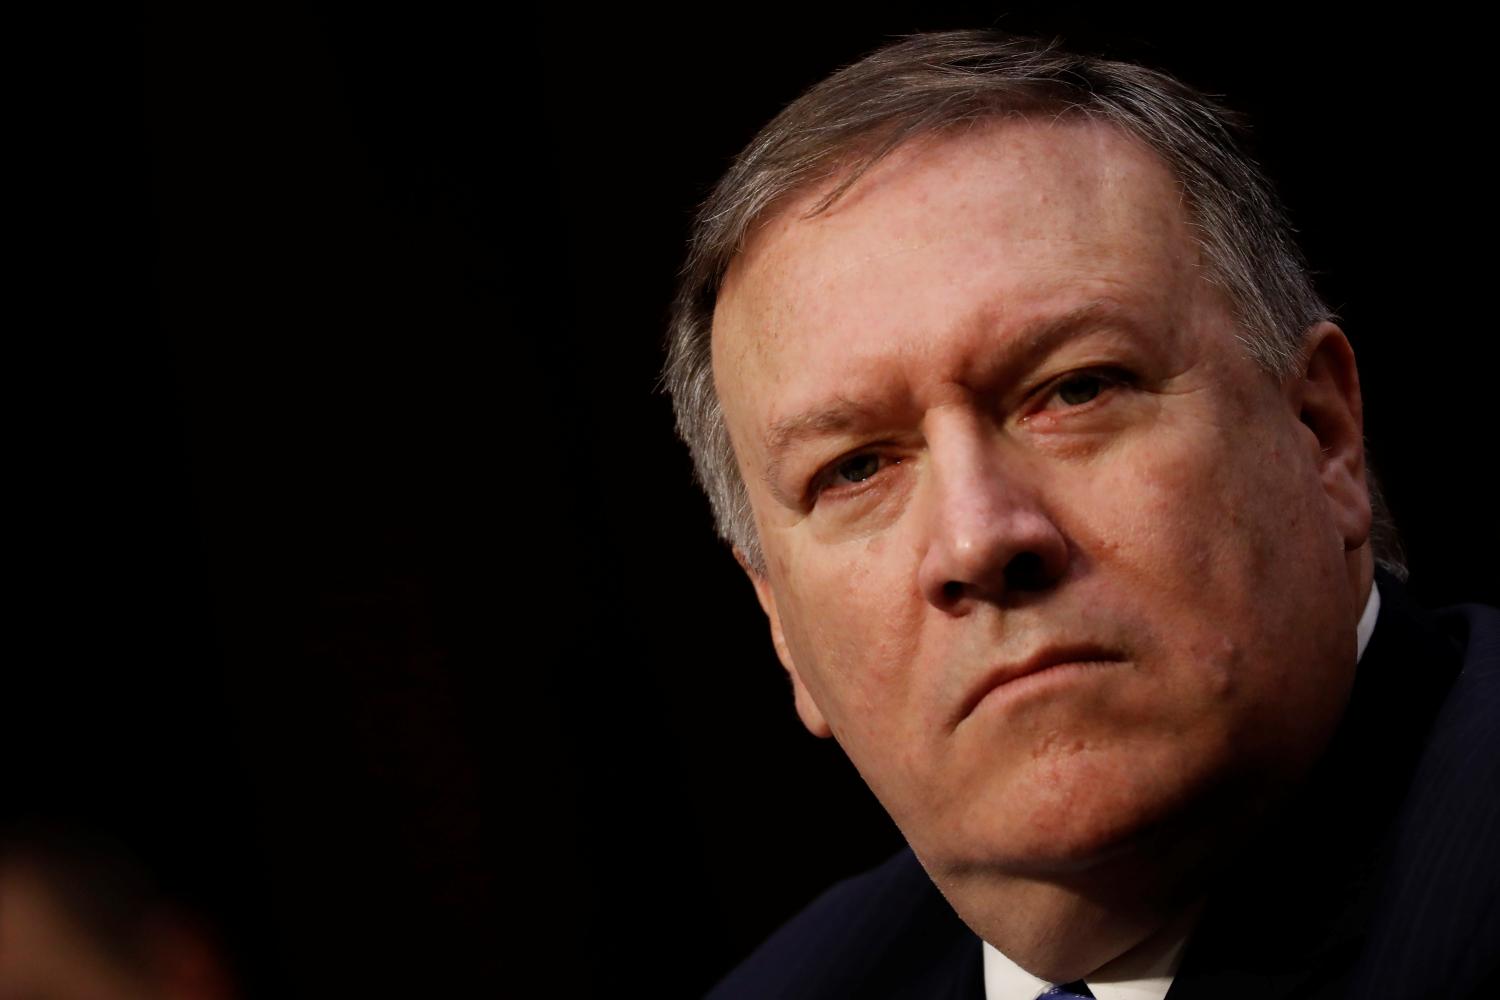 Central Intelligence Agency (CIA) Director Mike Pompeo testifies before the Senate Intelligence Committee on Capitol Hill in Washington, U.S., February 13, 2018. REUTERS/Aaron P. Bernstein - RC1F4C4B7B50